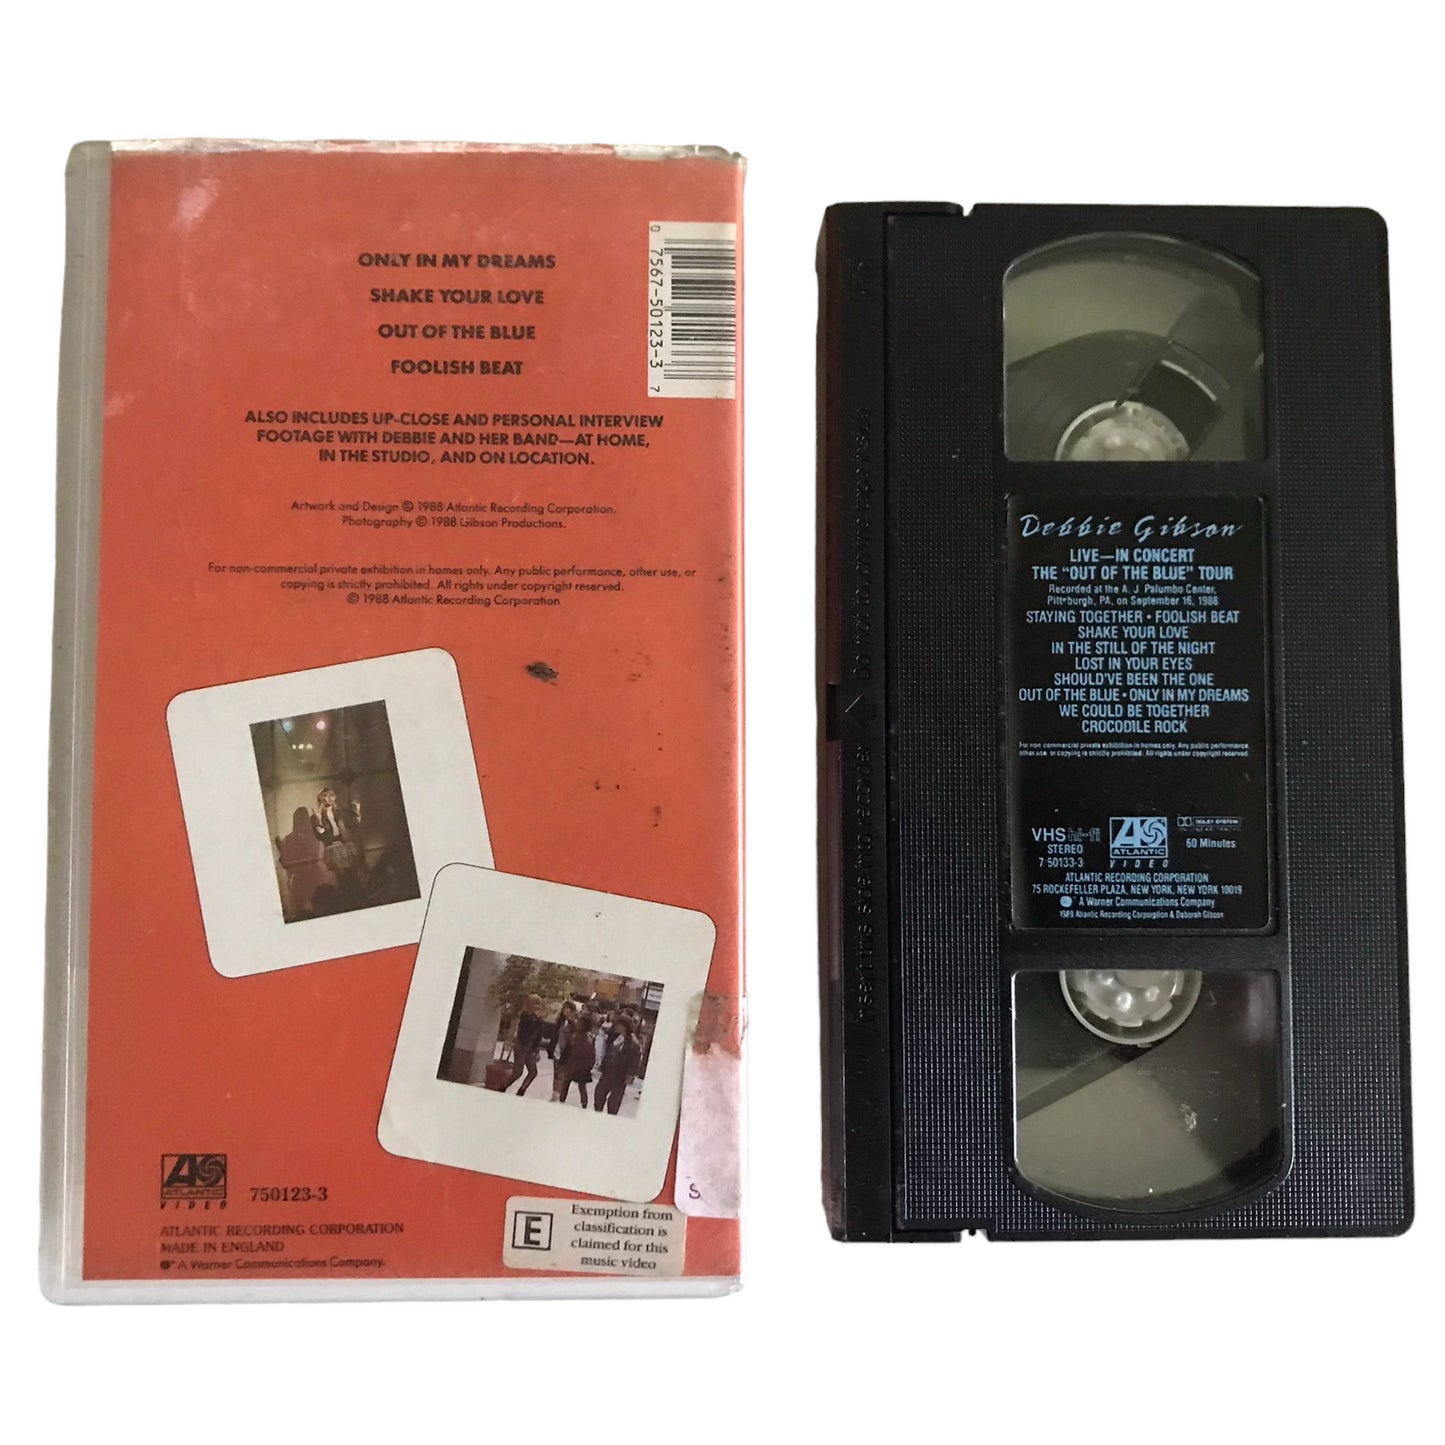 Debbie Gibson - Out of the blue - Debbie Gibson - ATLANTIC - Music - Pal - VHS-